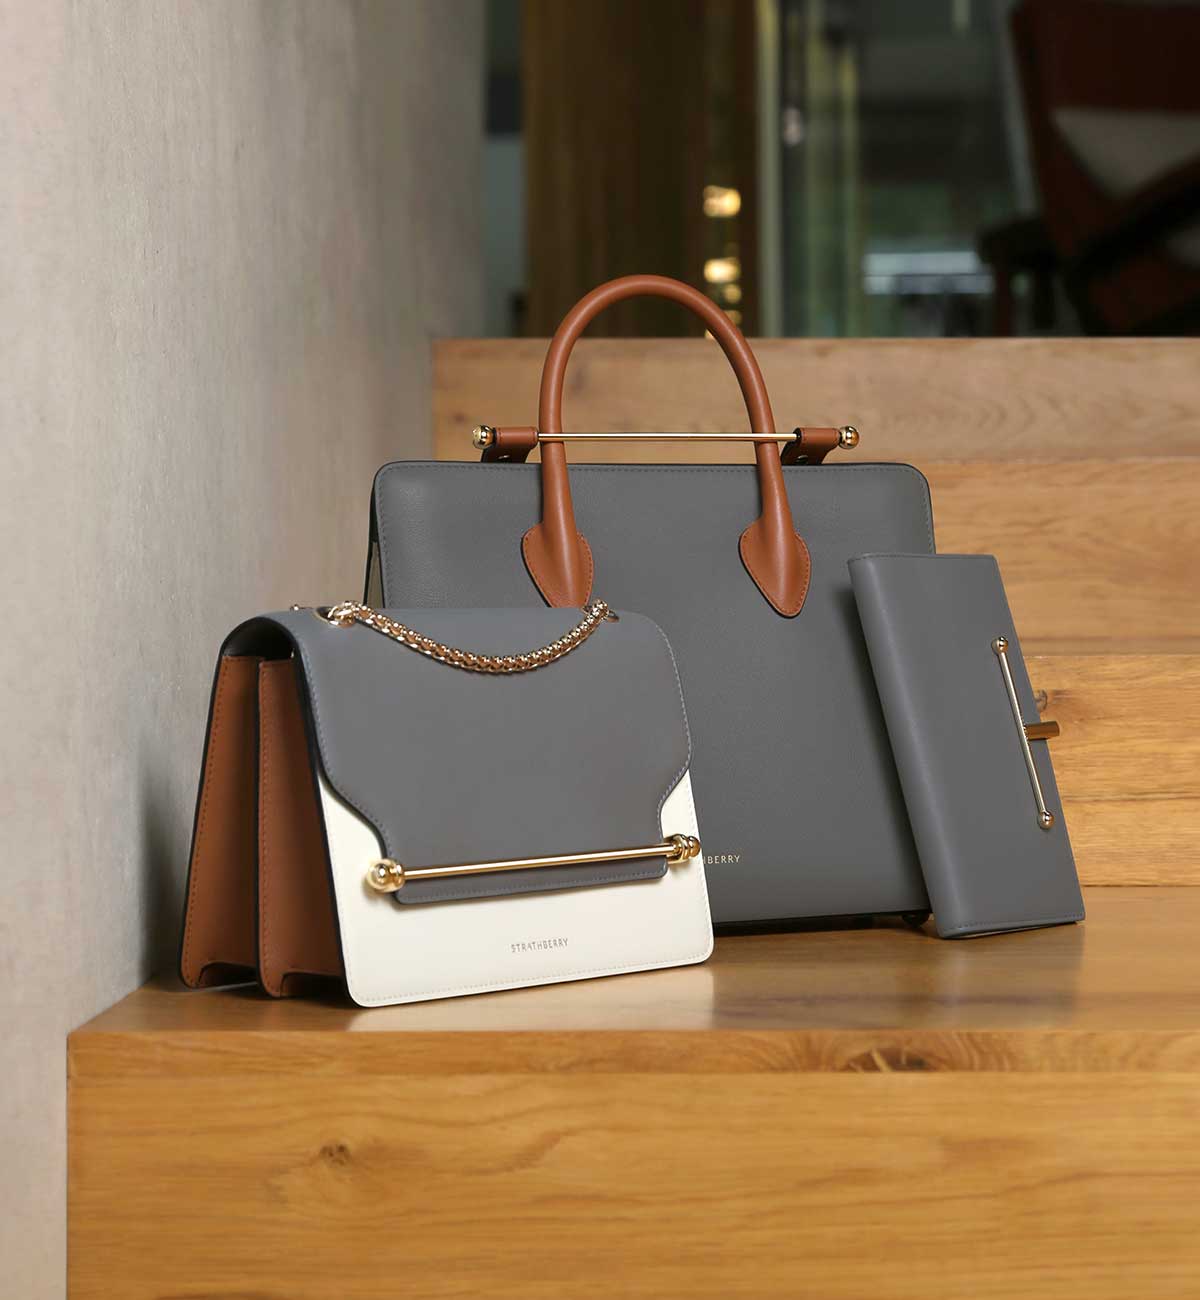 Strathberry Nano Leather Tote in Black